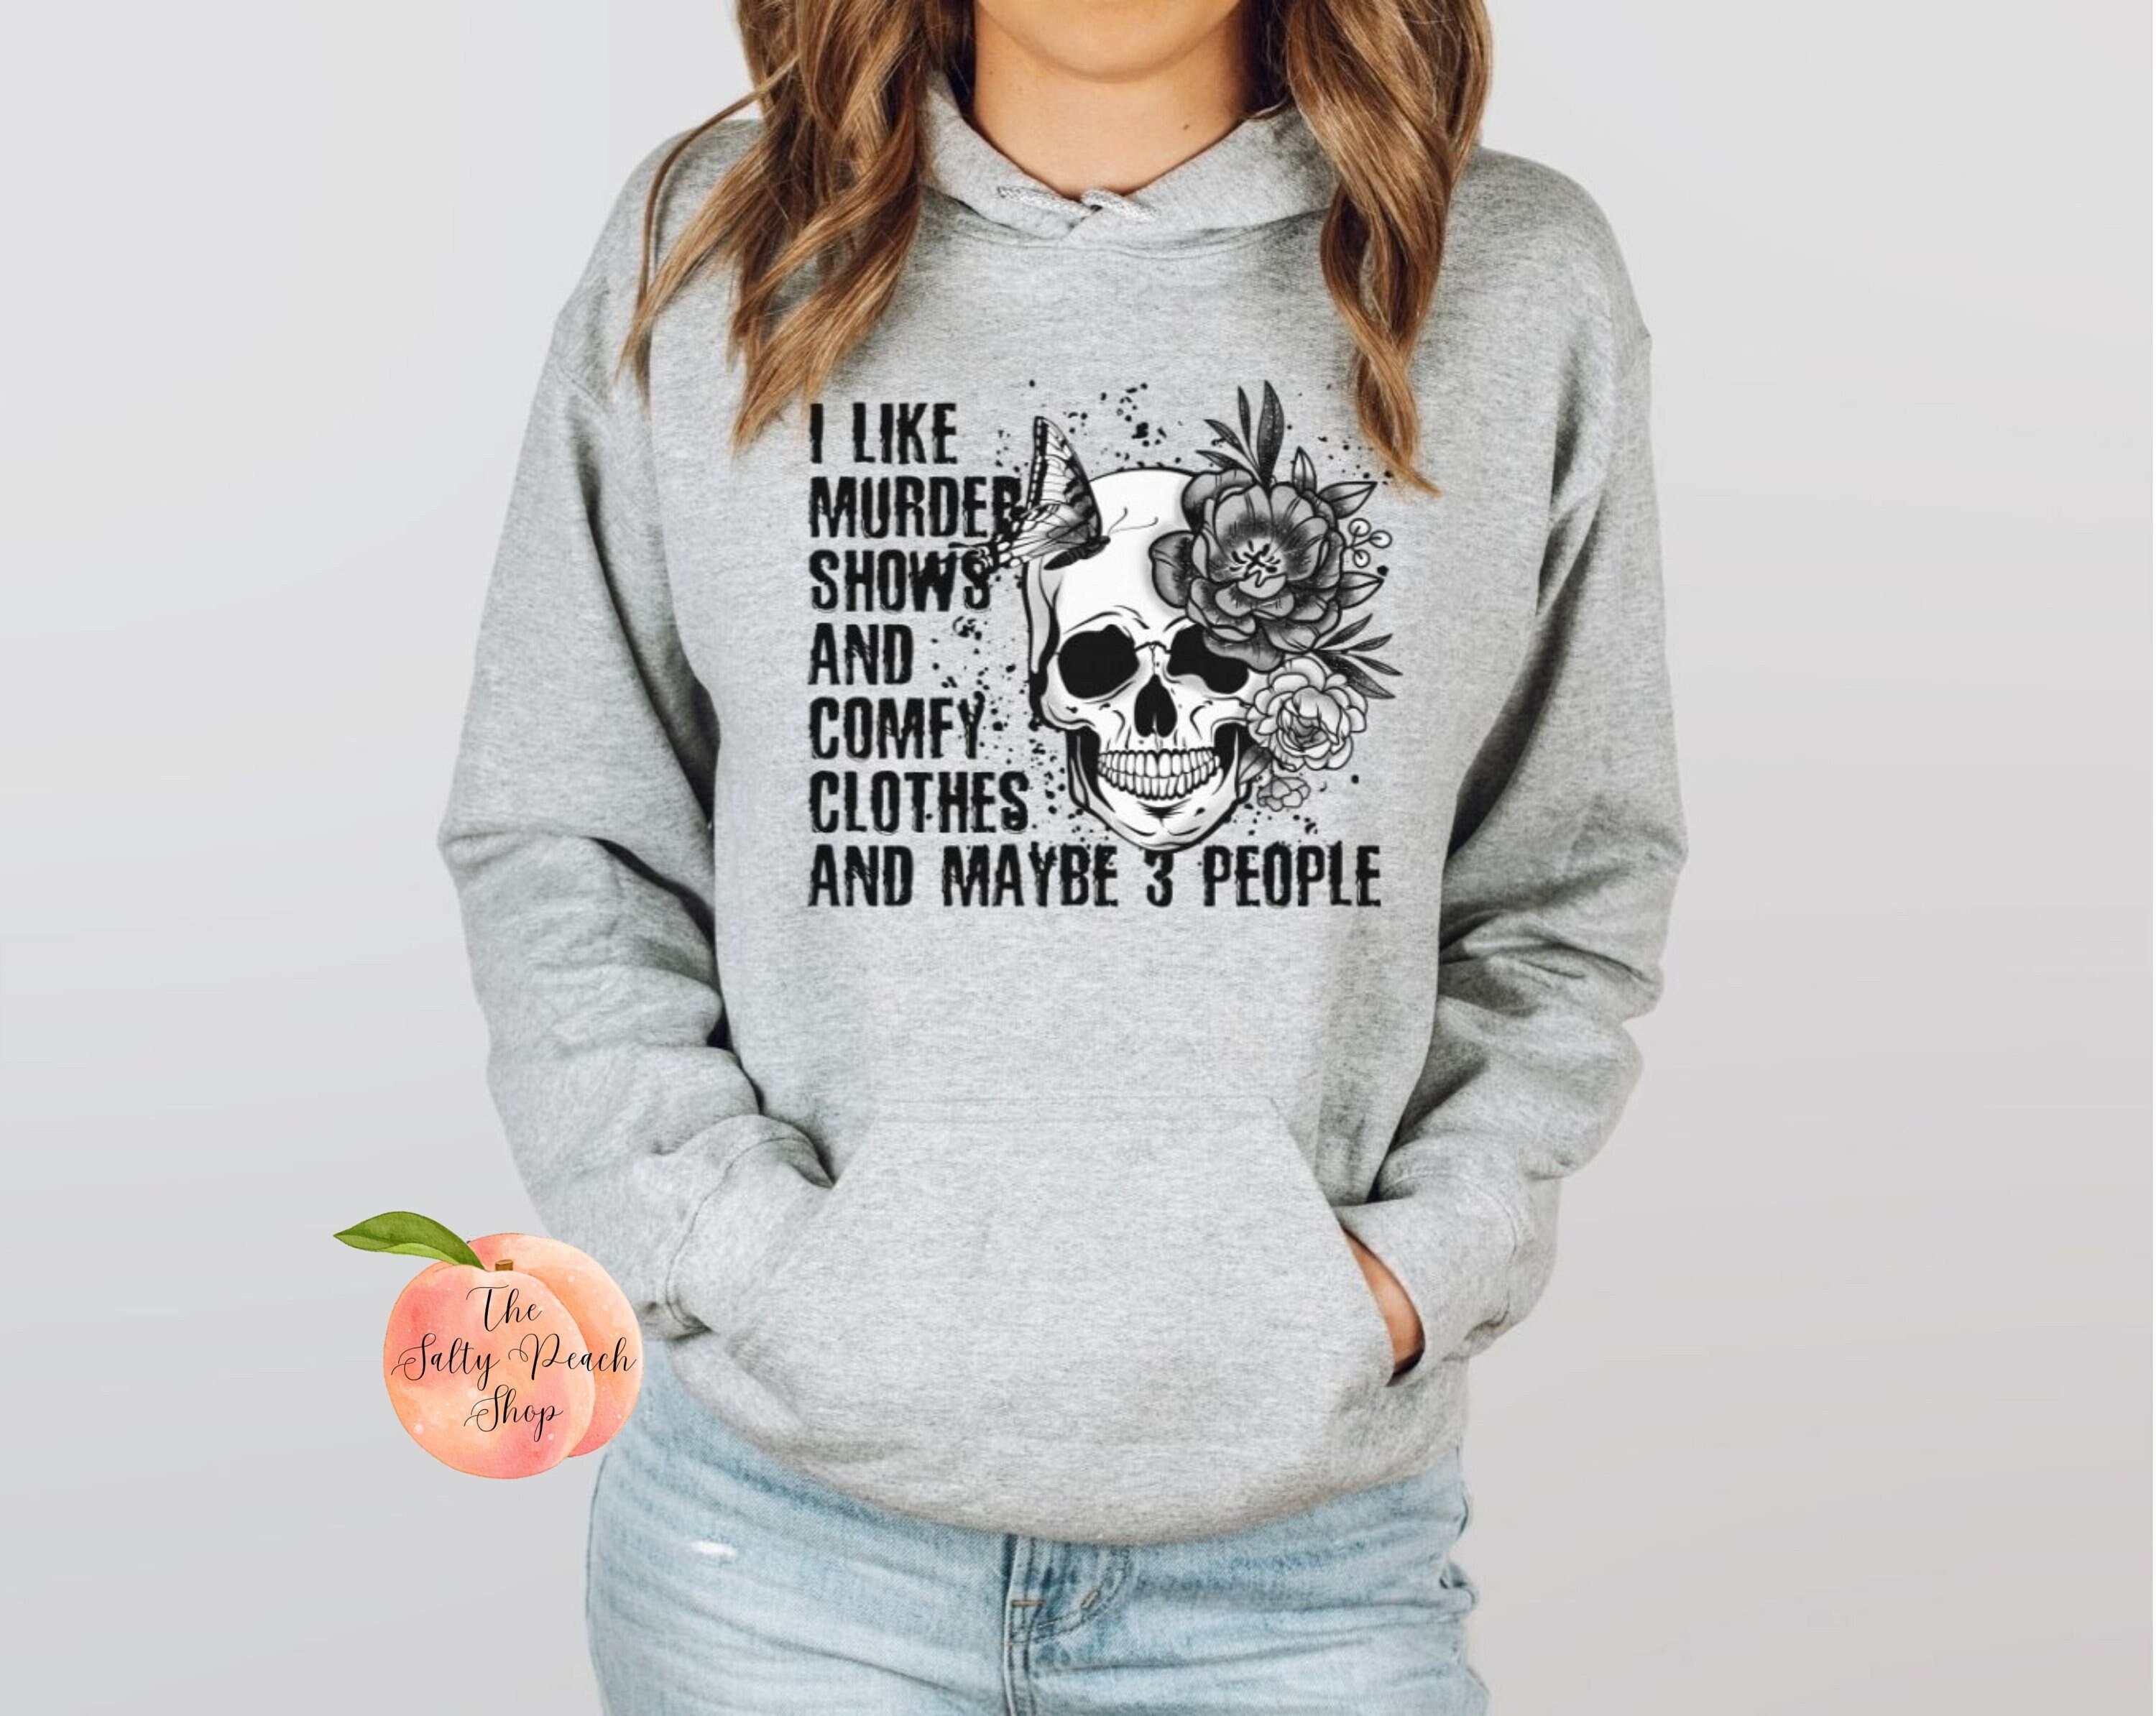 I Like Murder Shows and Comfy Clothes Hoodie, Women's Sassy Funny  Sweatshirt, Skull Flower Tattoo Design, True Crime Junkie Obsessed Hoodie 